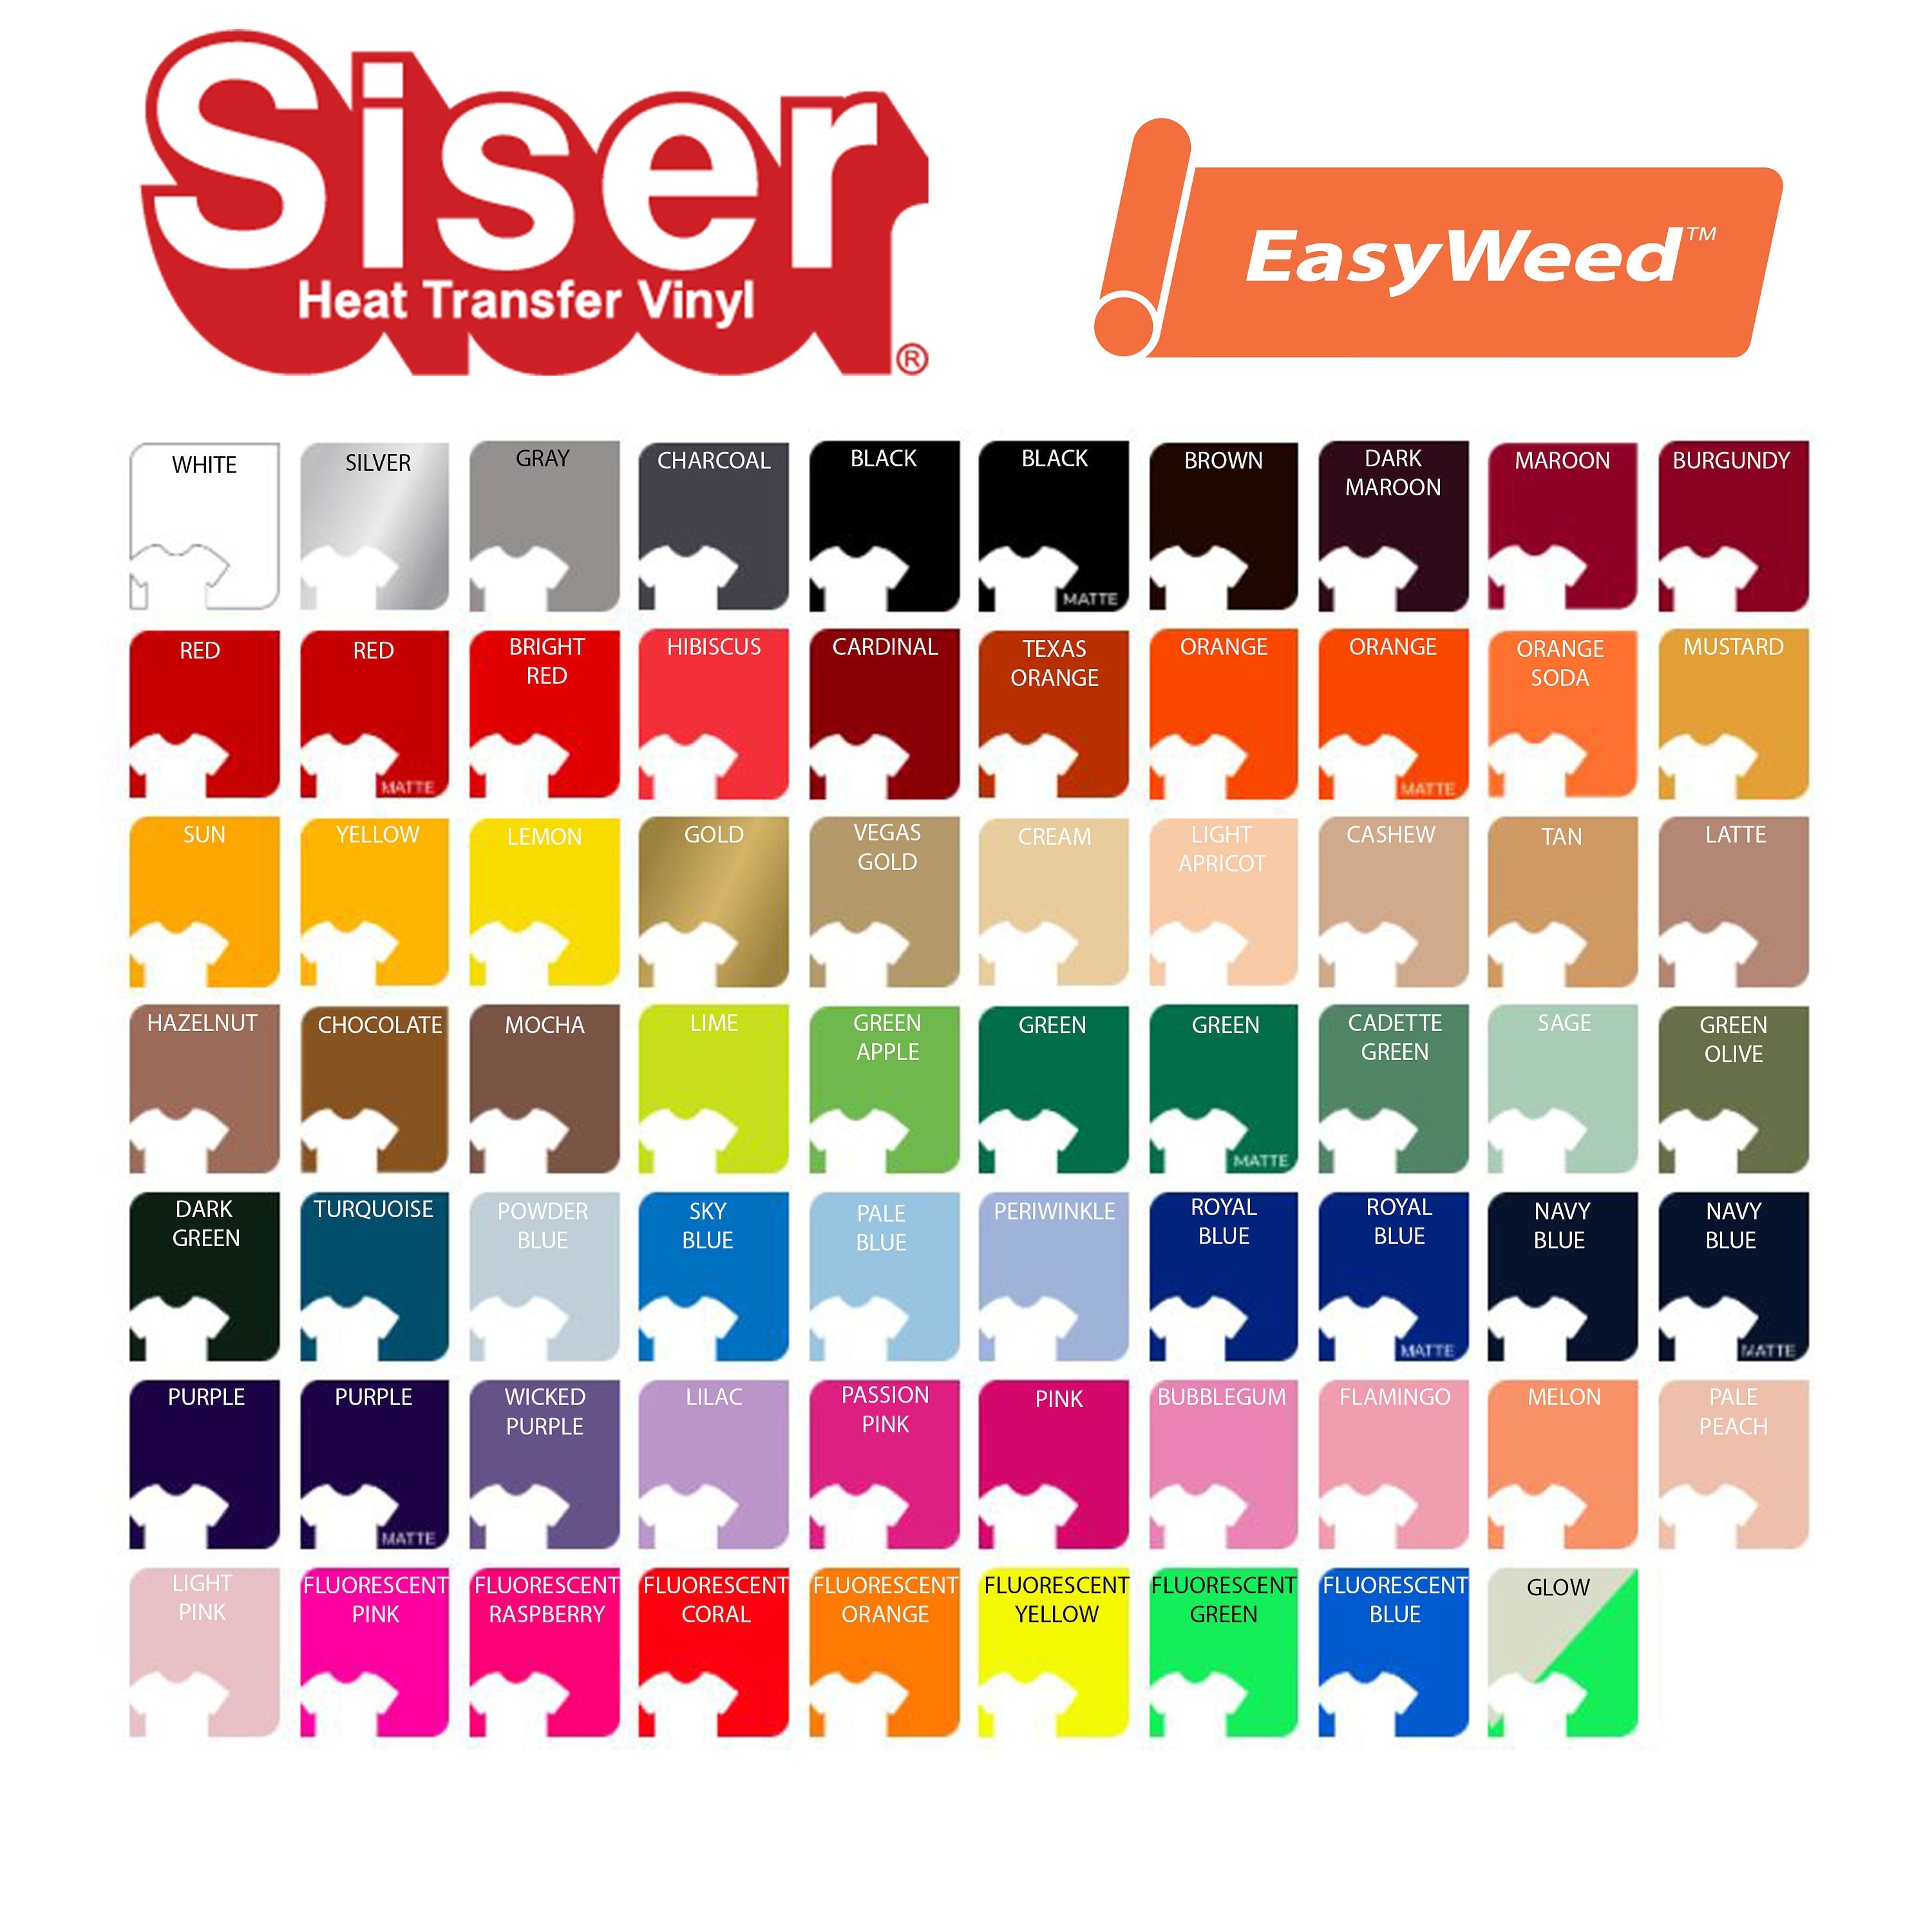 Mix & Match 12x12 Sheets Siser Easyweed HTV Iron-on Heat Transfer Vinyl for  Silhouette Cameo, Cricut 